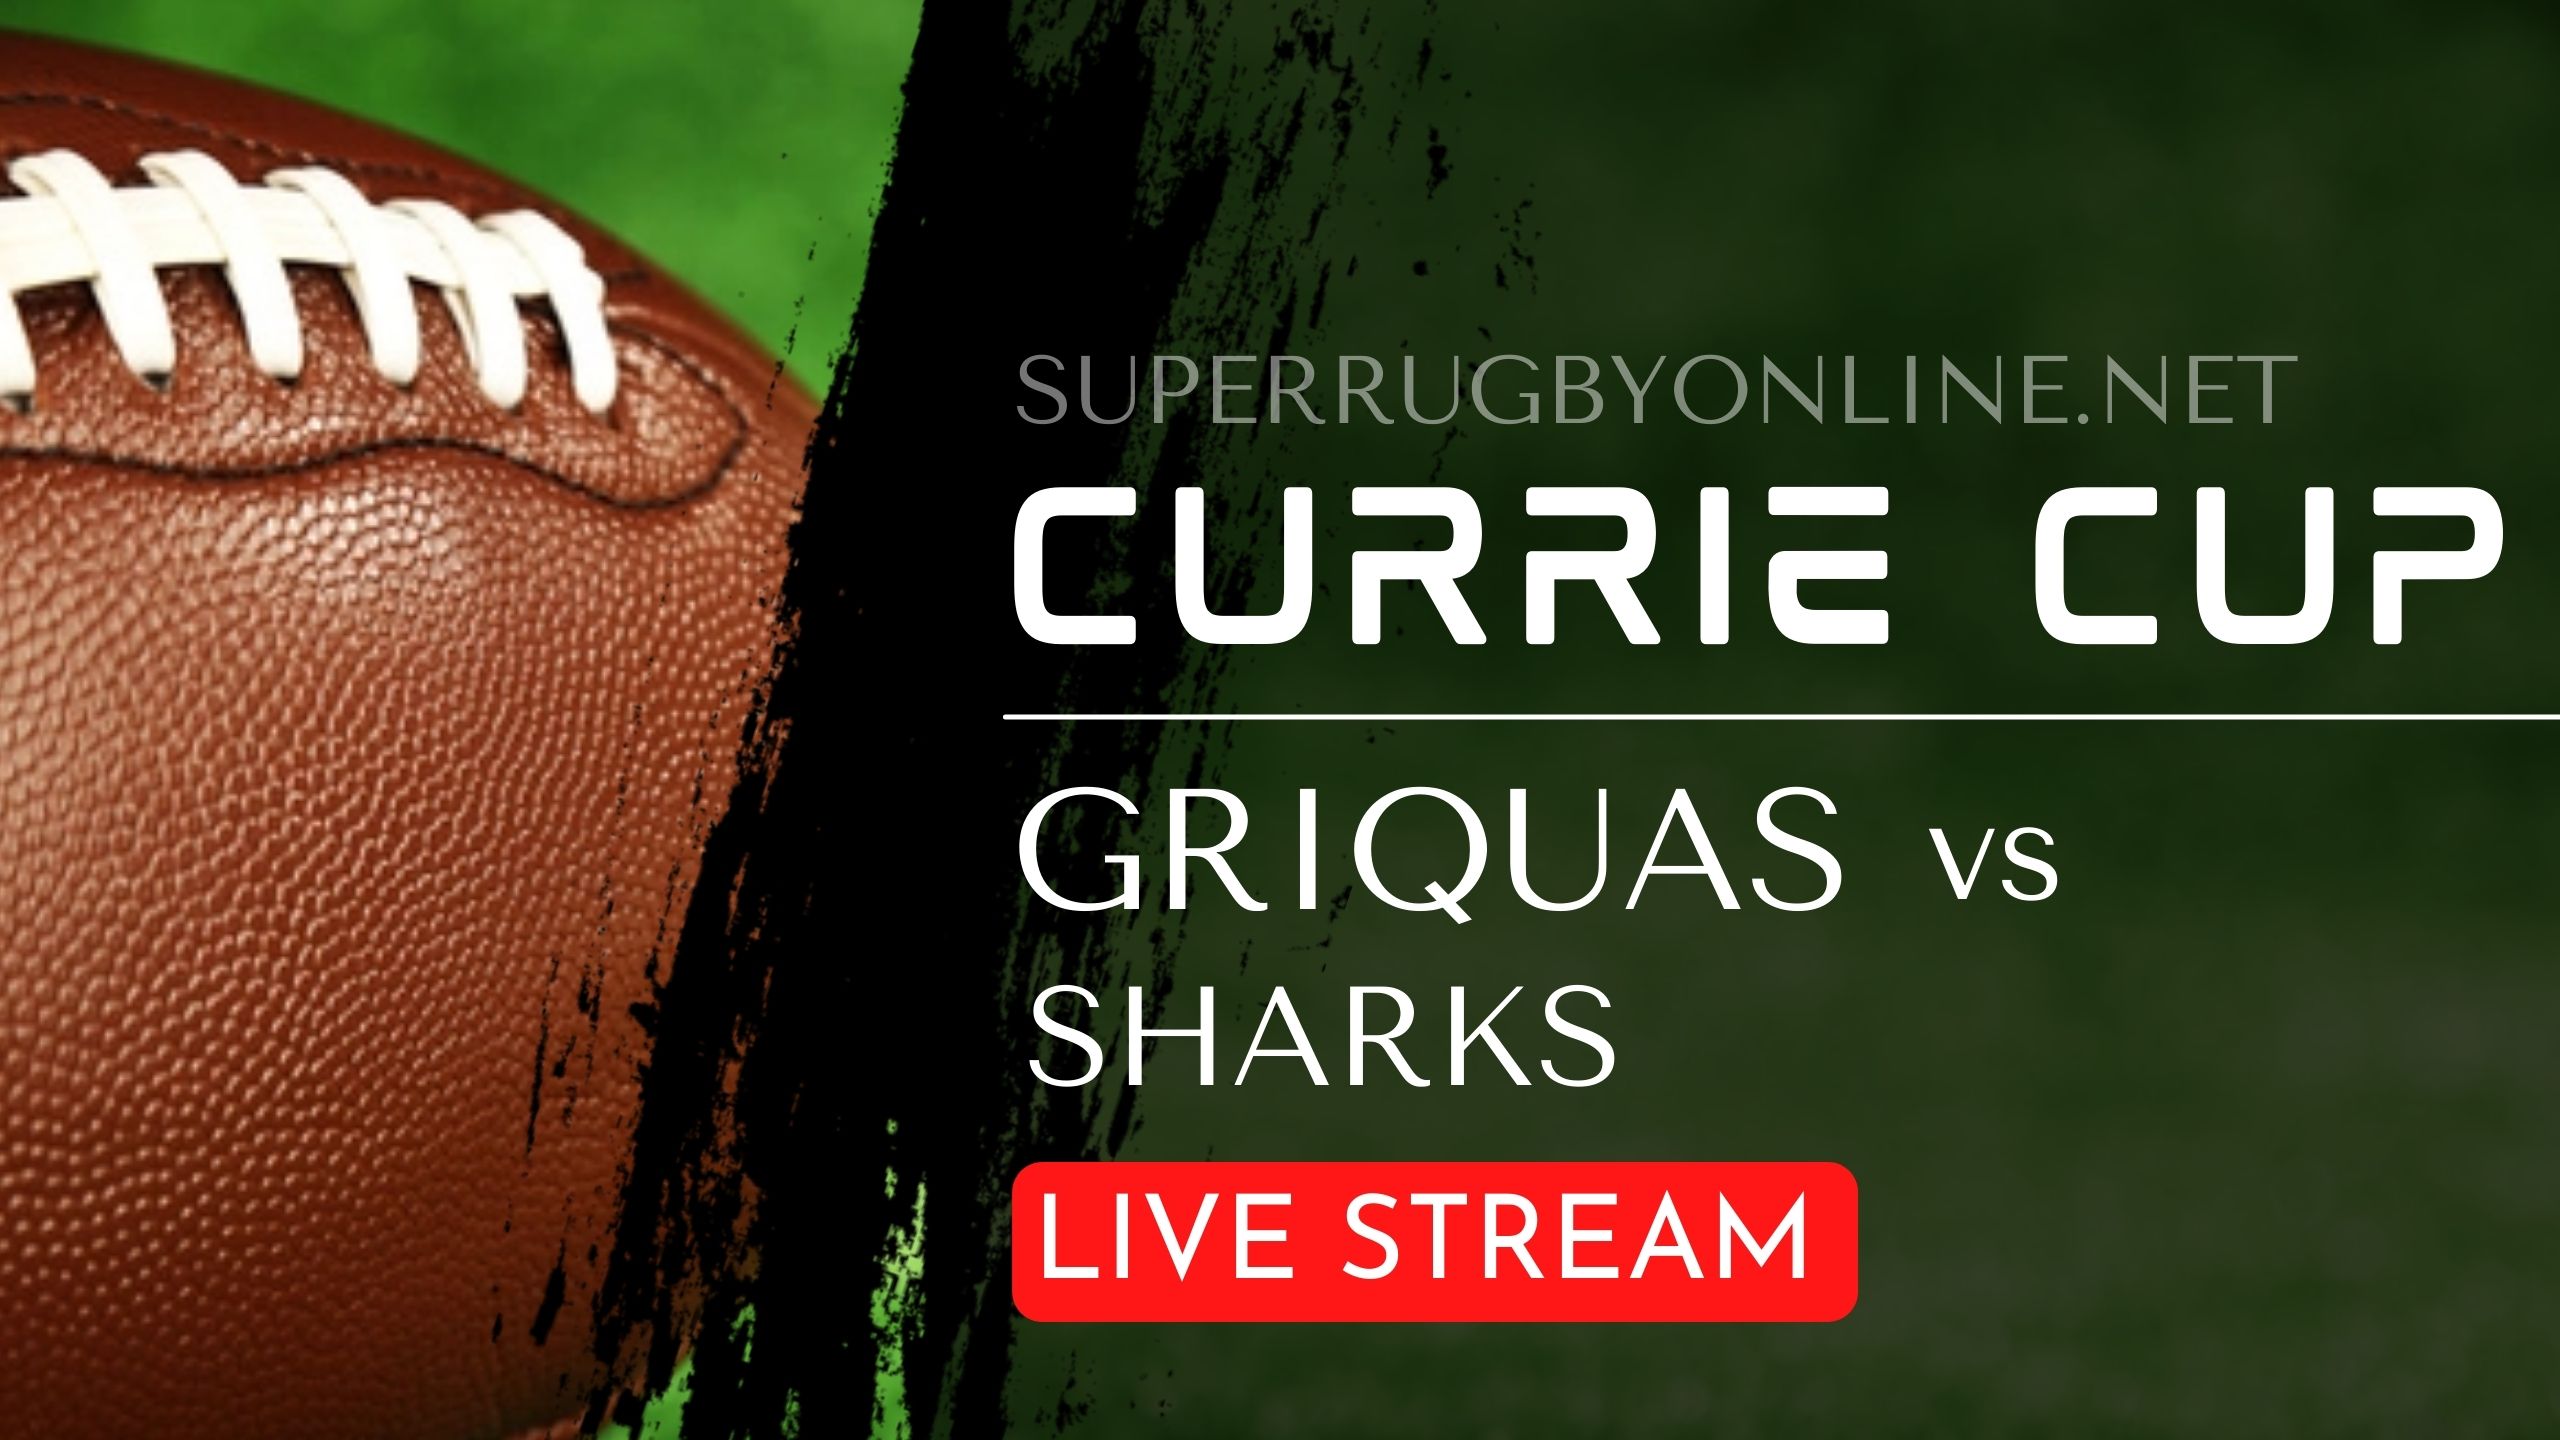 griquas-vs-sharks-full-rugby-matches-live-online